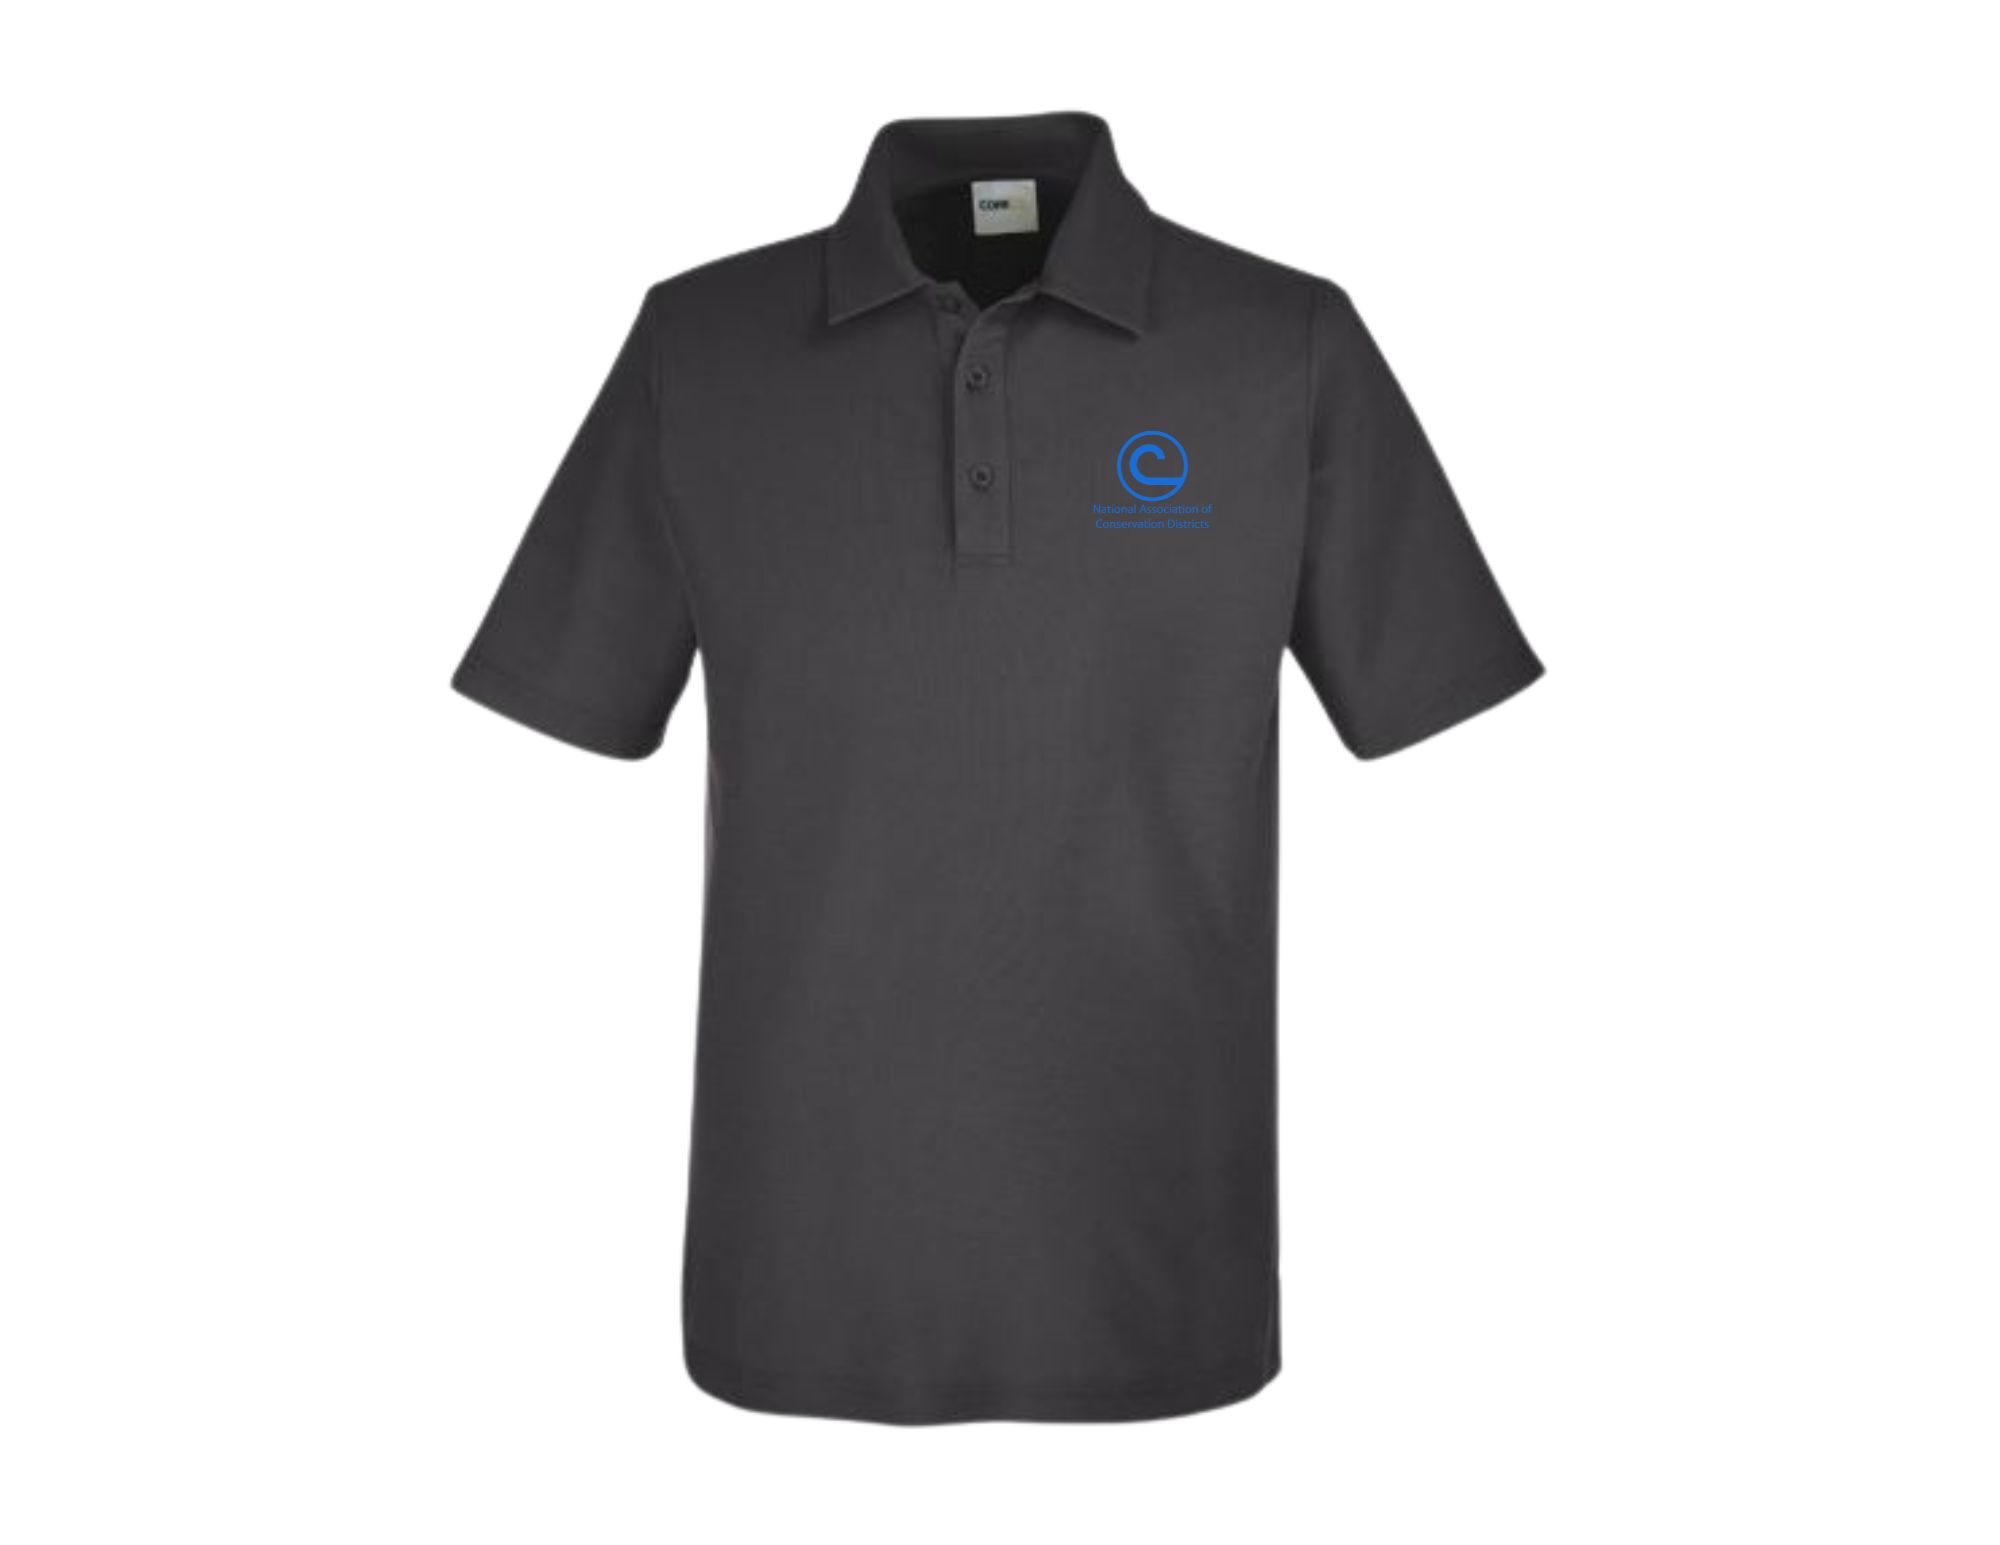 Core 365 Embroidered Performance Polo Shirt-image